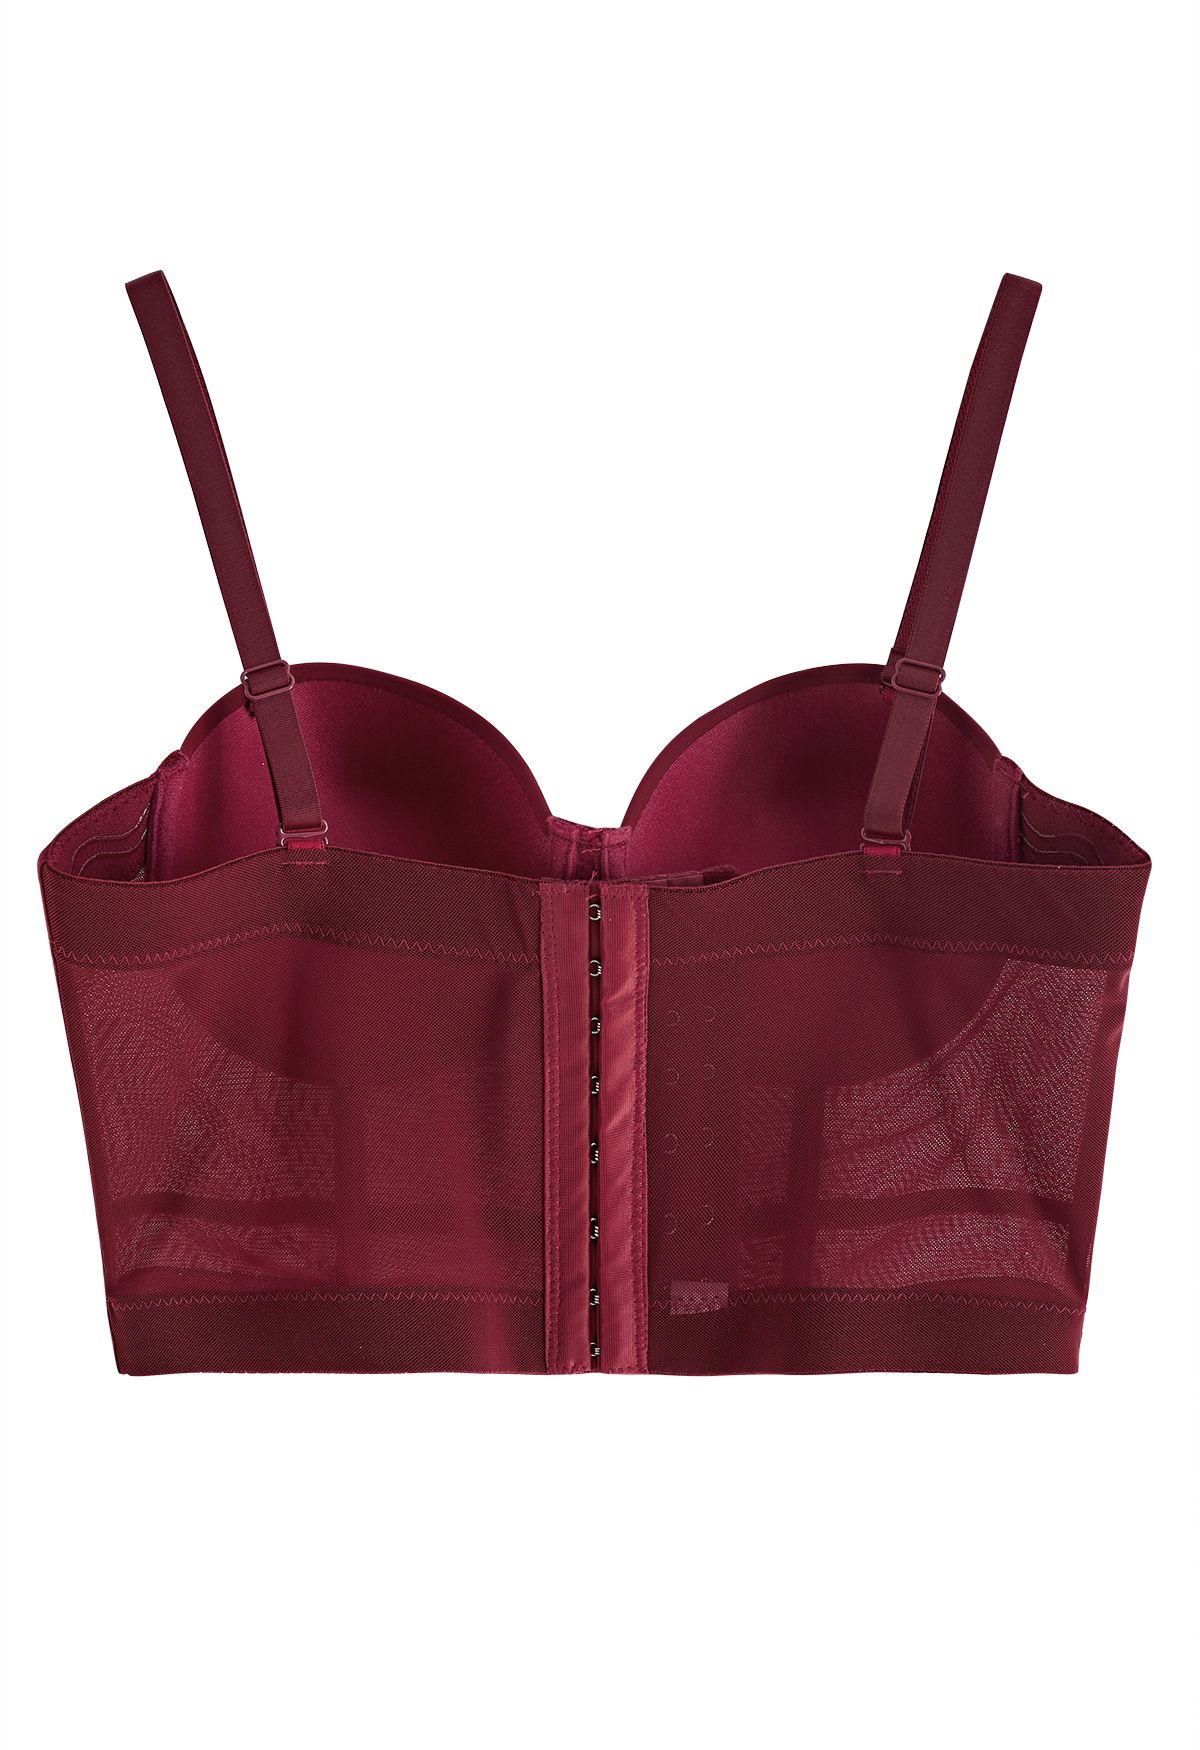 Burgundy Lined Elastic Lace Bandeau Top, Strapless Bra 